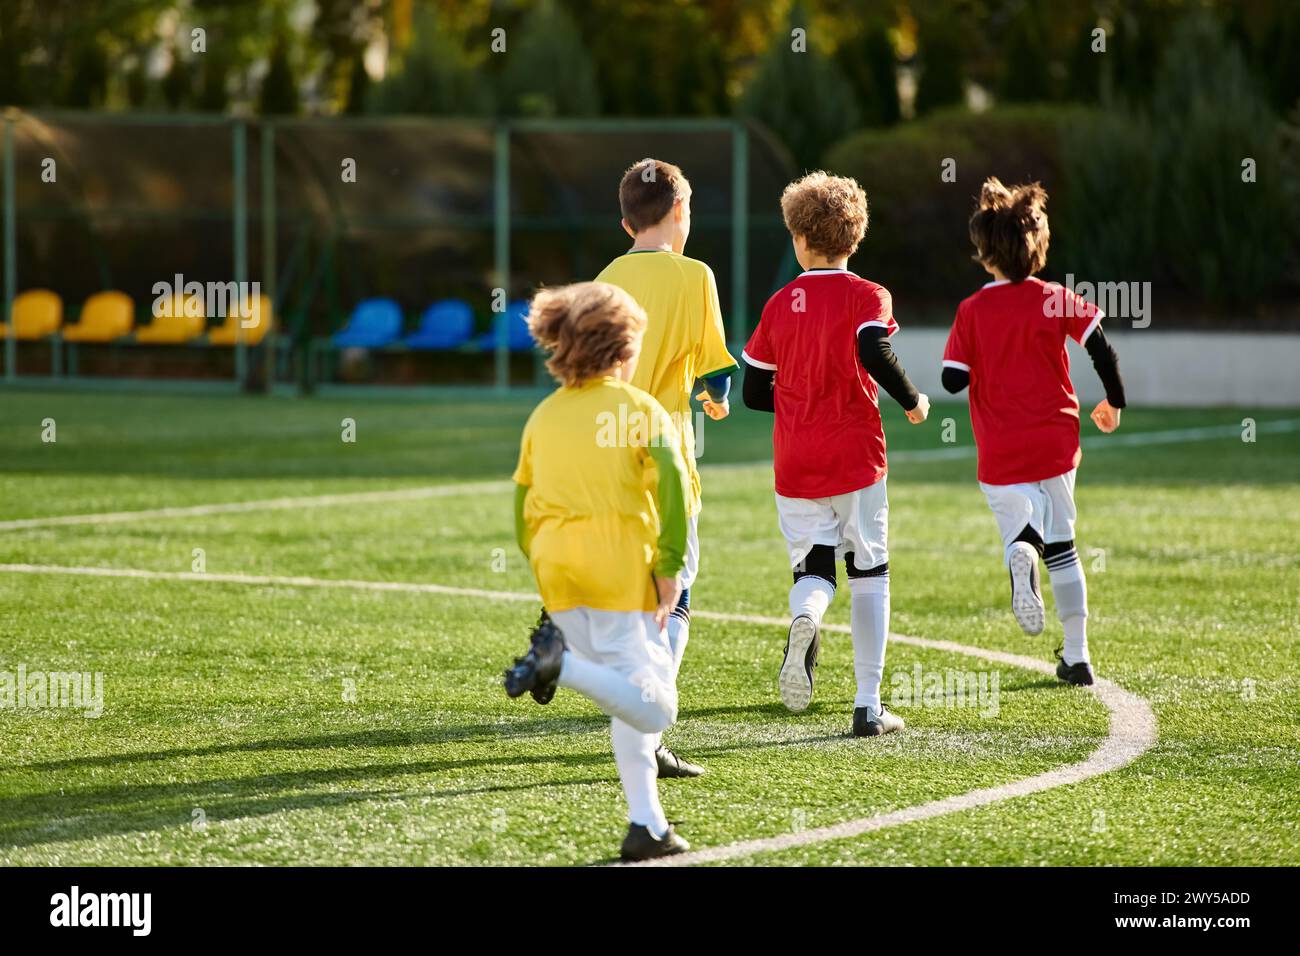 A lively scene of children playing a spirited game of soccer, running, kicking, and cheering on the grassy field with enthusiasm and excitement. Stock Photo